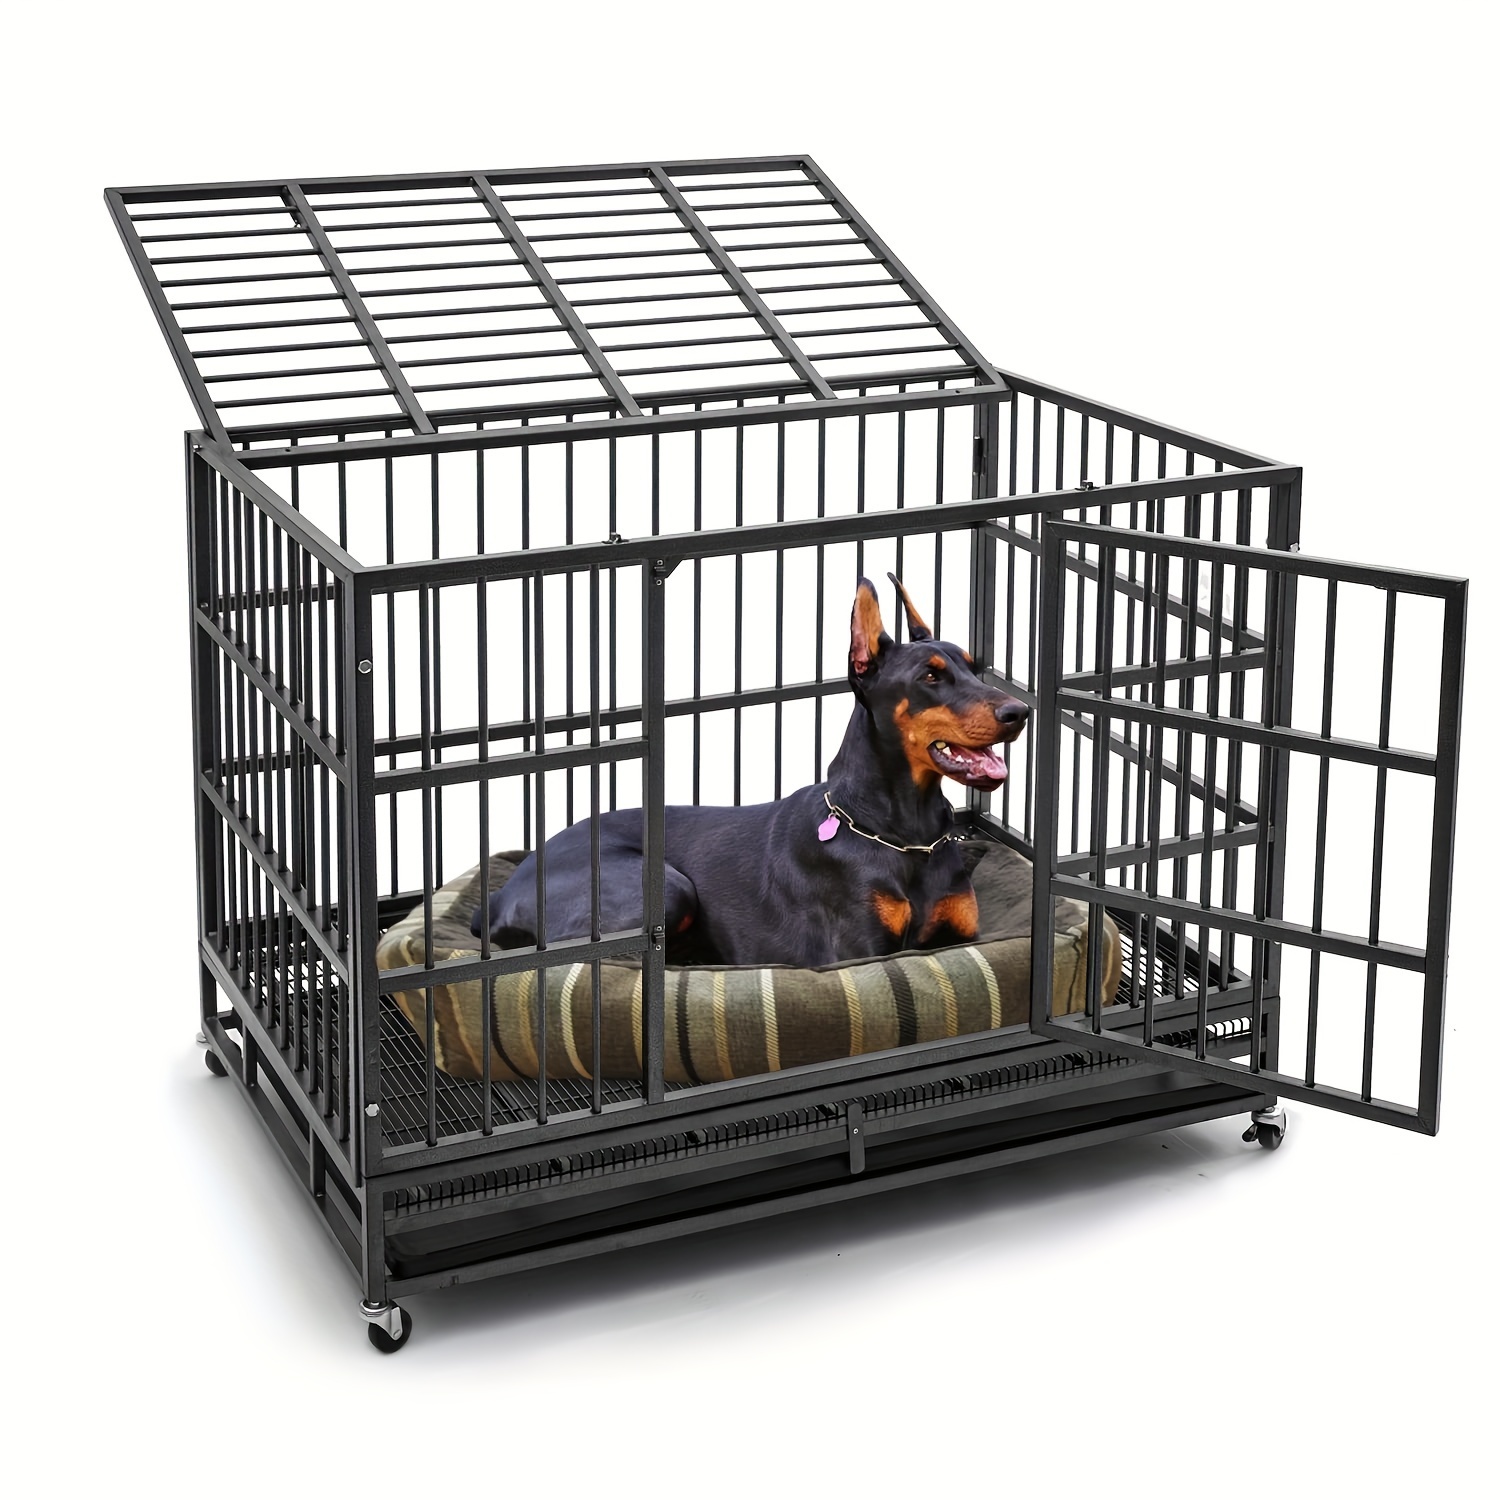 

48in Heavy Duty Dog Crate Steel Escape Proof, Indoor Double Door High Anxiety Cage, Kennel With 2 Stainless Steel Bowls, Wheels, Removable Tray, Extra Large Xl Xxl Cage